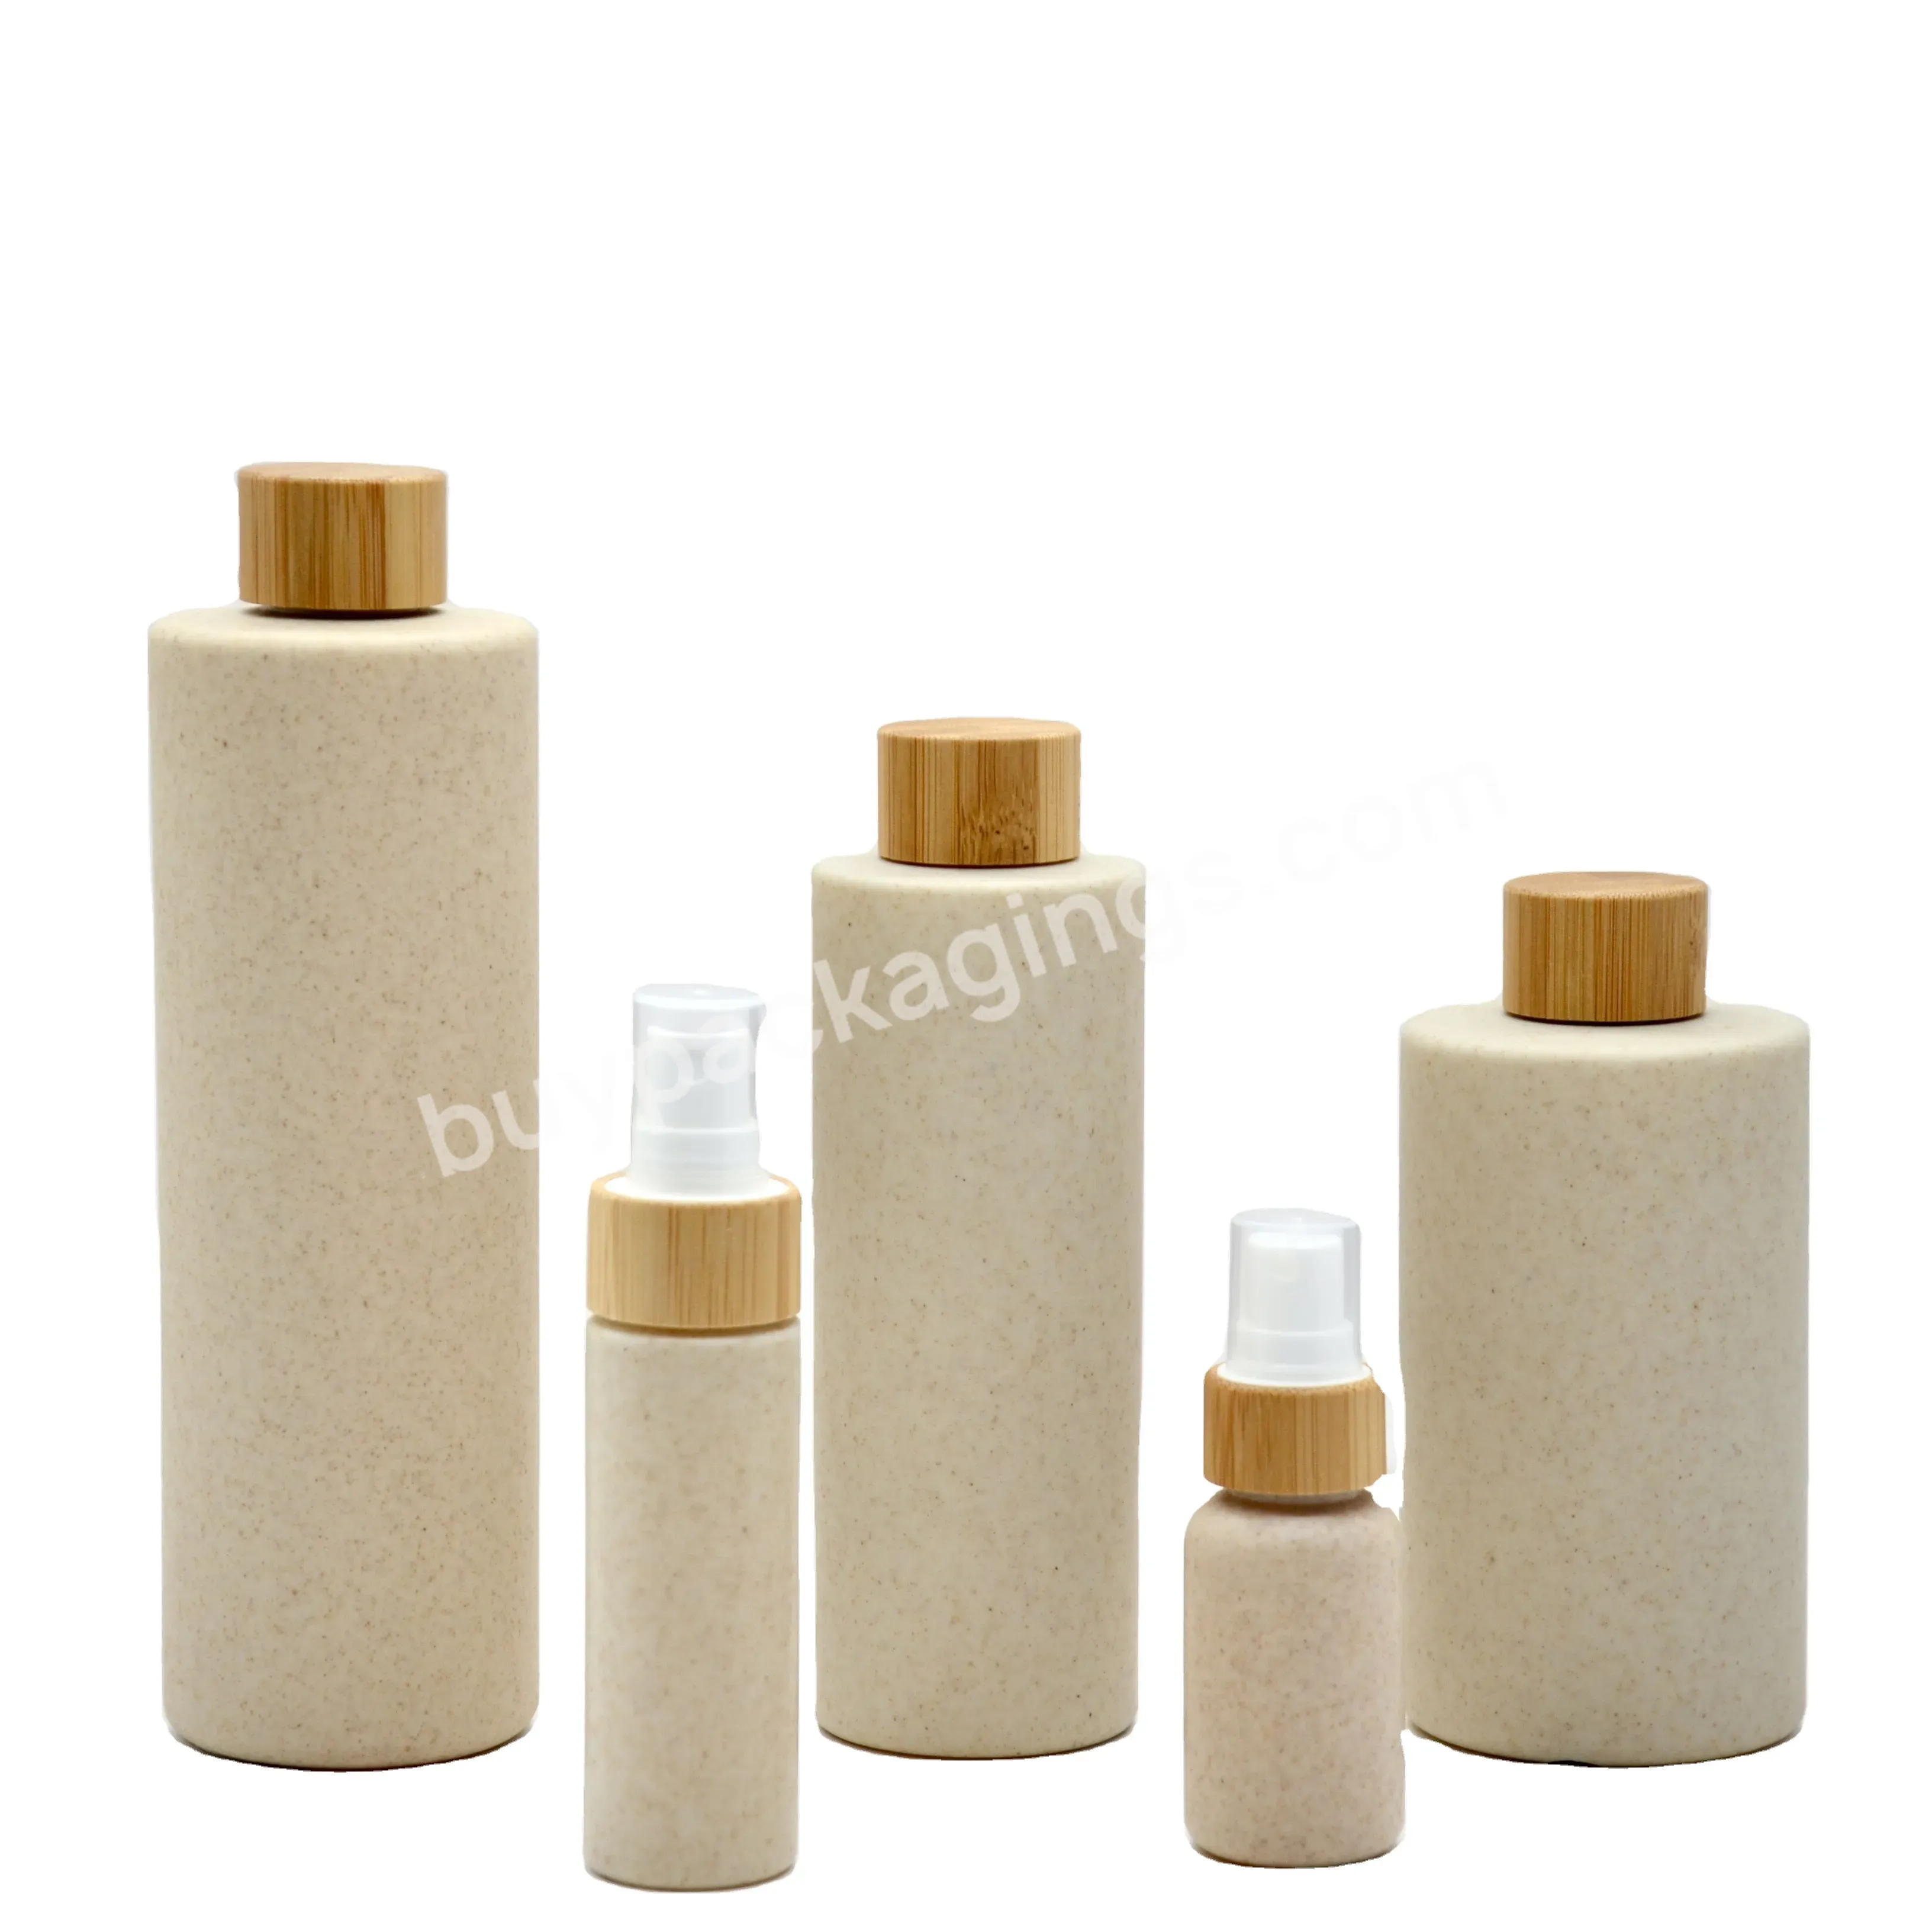 Eco Friendly Biodegradable Plastic Shampoo Spray Container Compostable Wheat Straw Cosmetic Bottle - Buy Biodegradable Pla Bottles,Biodegradable Wheat Straw Bottles,Wheat Straw Biodegradable Plastic Bottle.